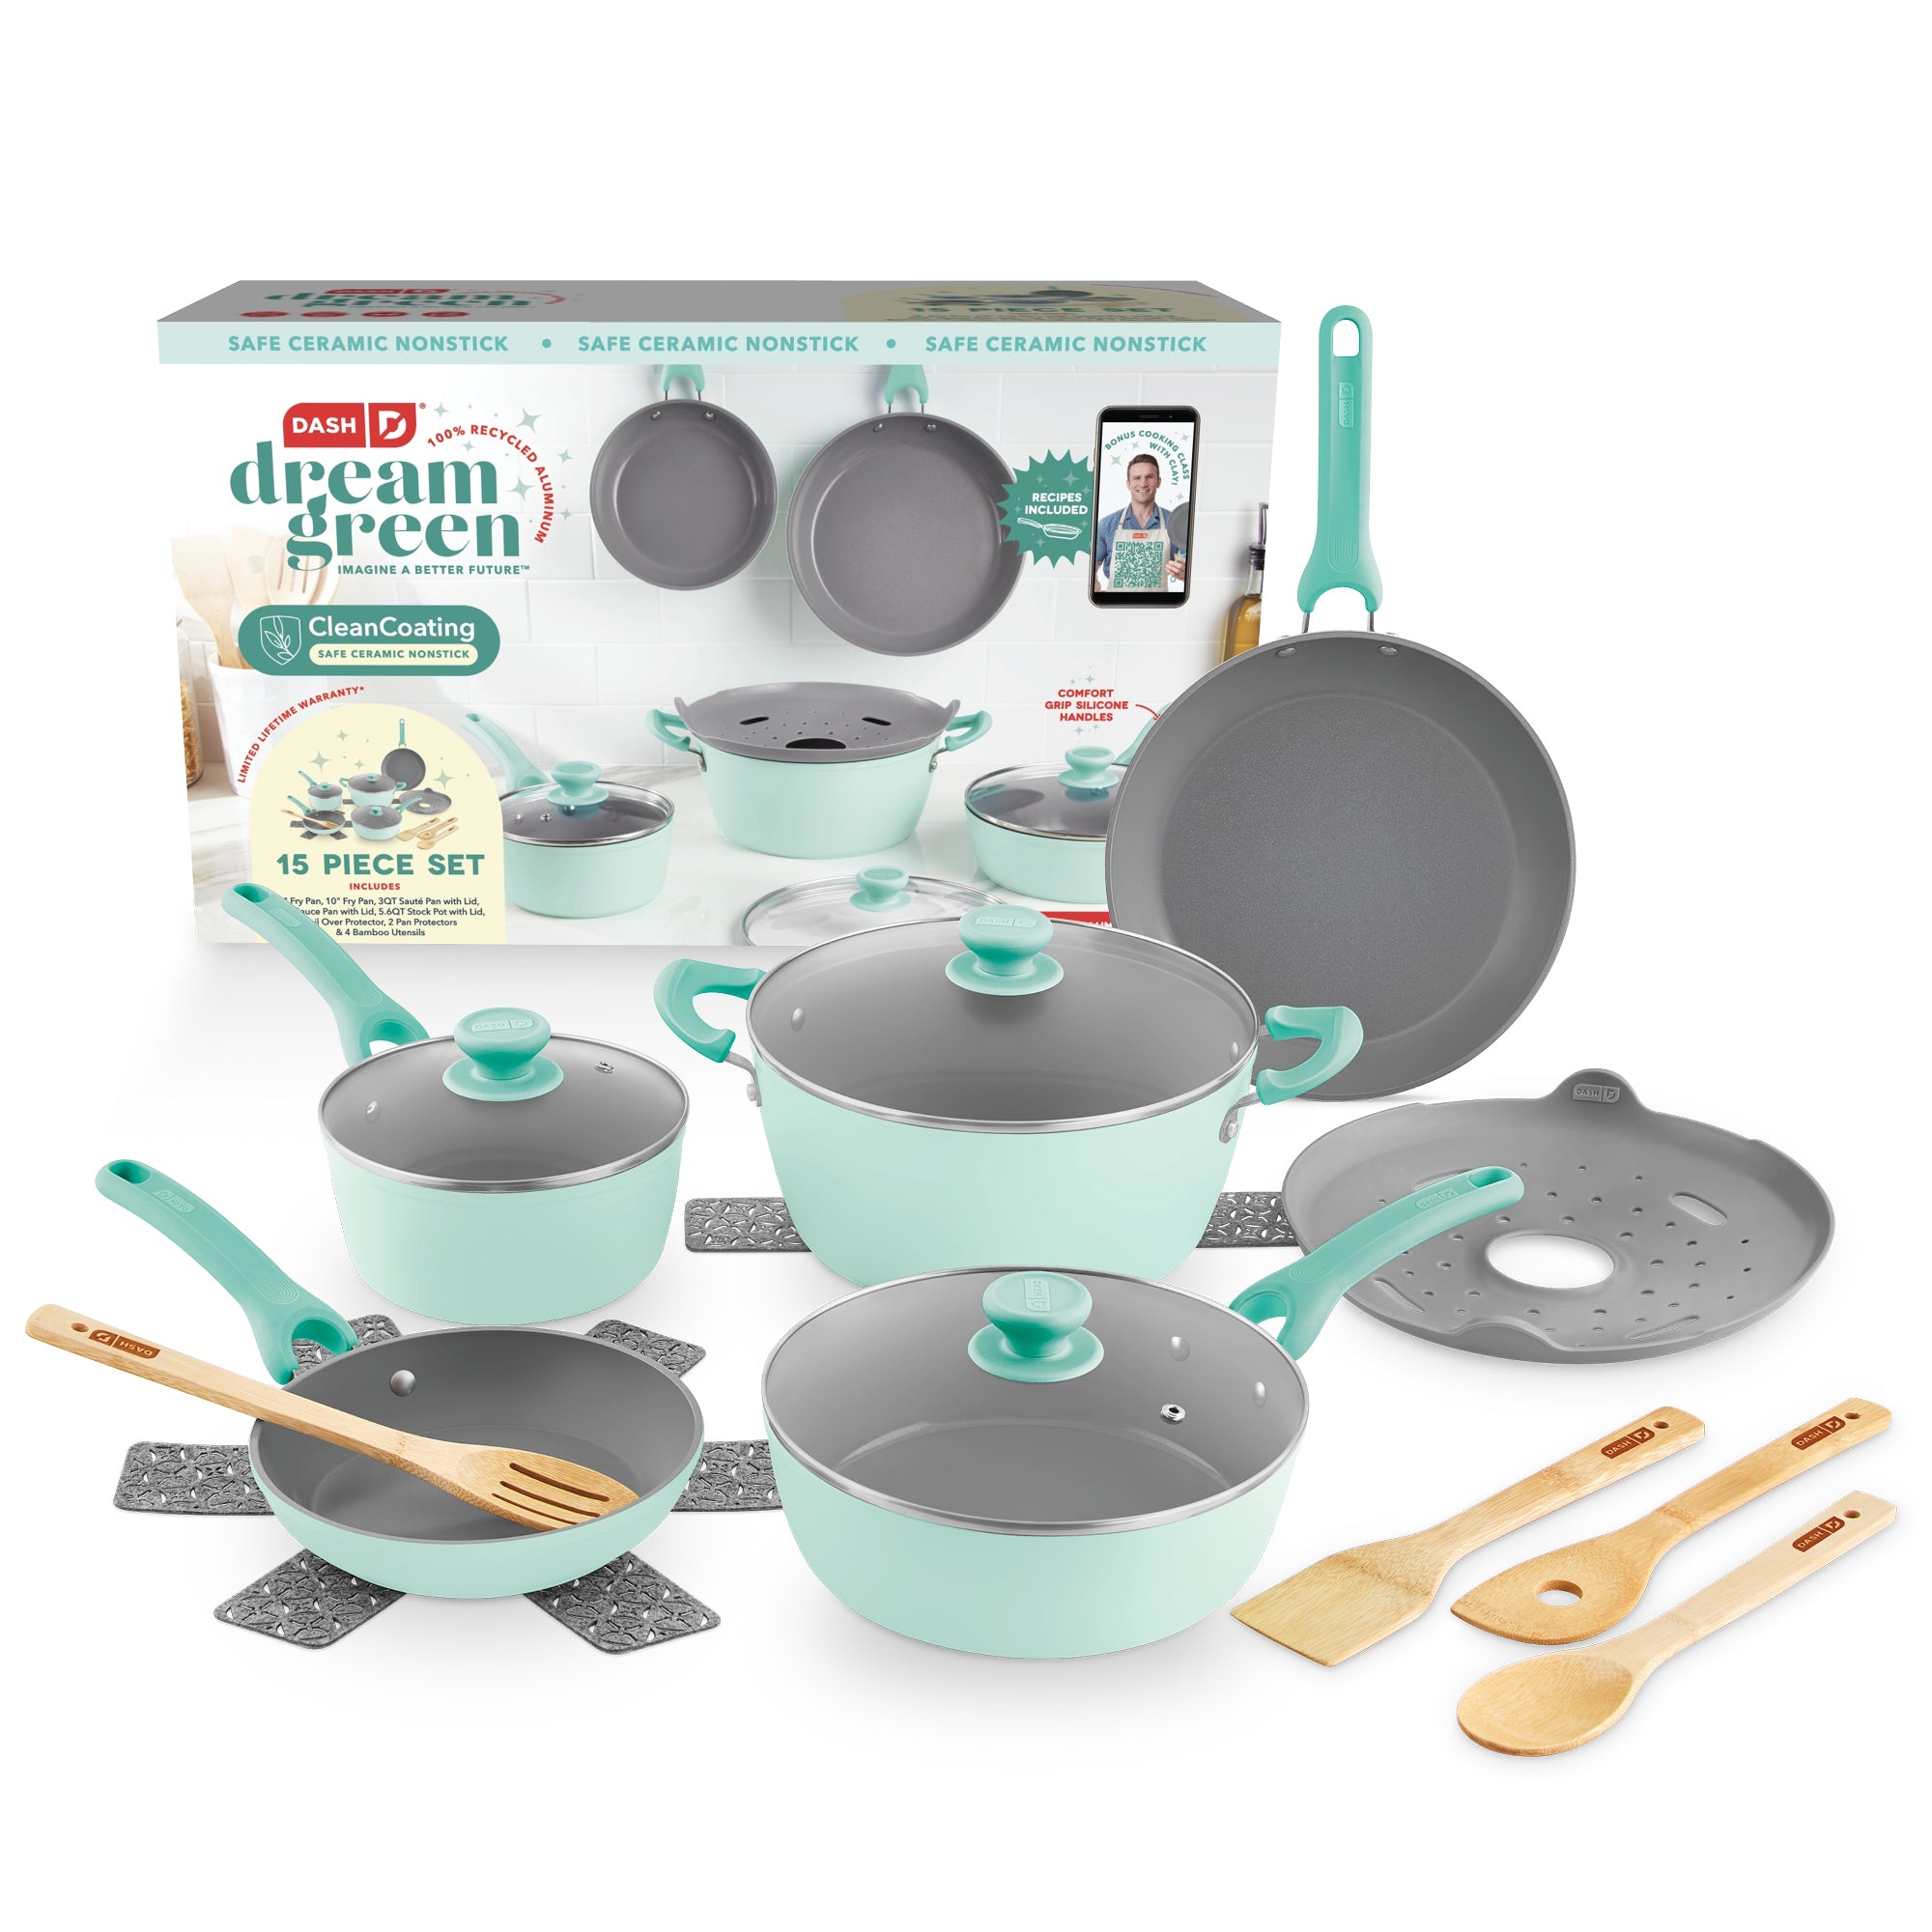 4 Piece Cast Iron Set with Silicone Handles